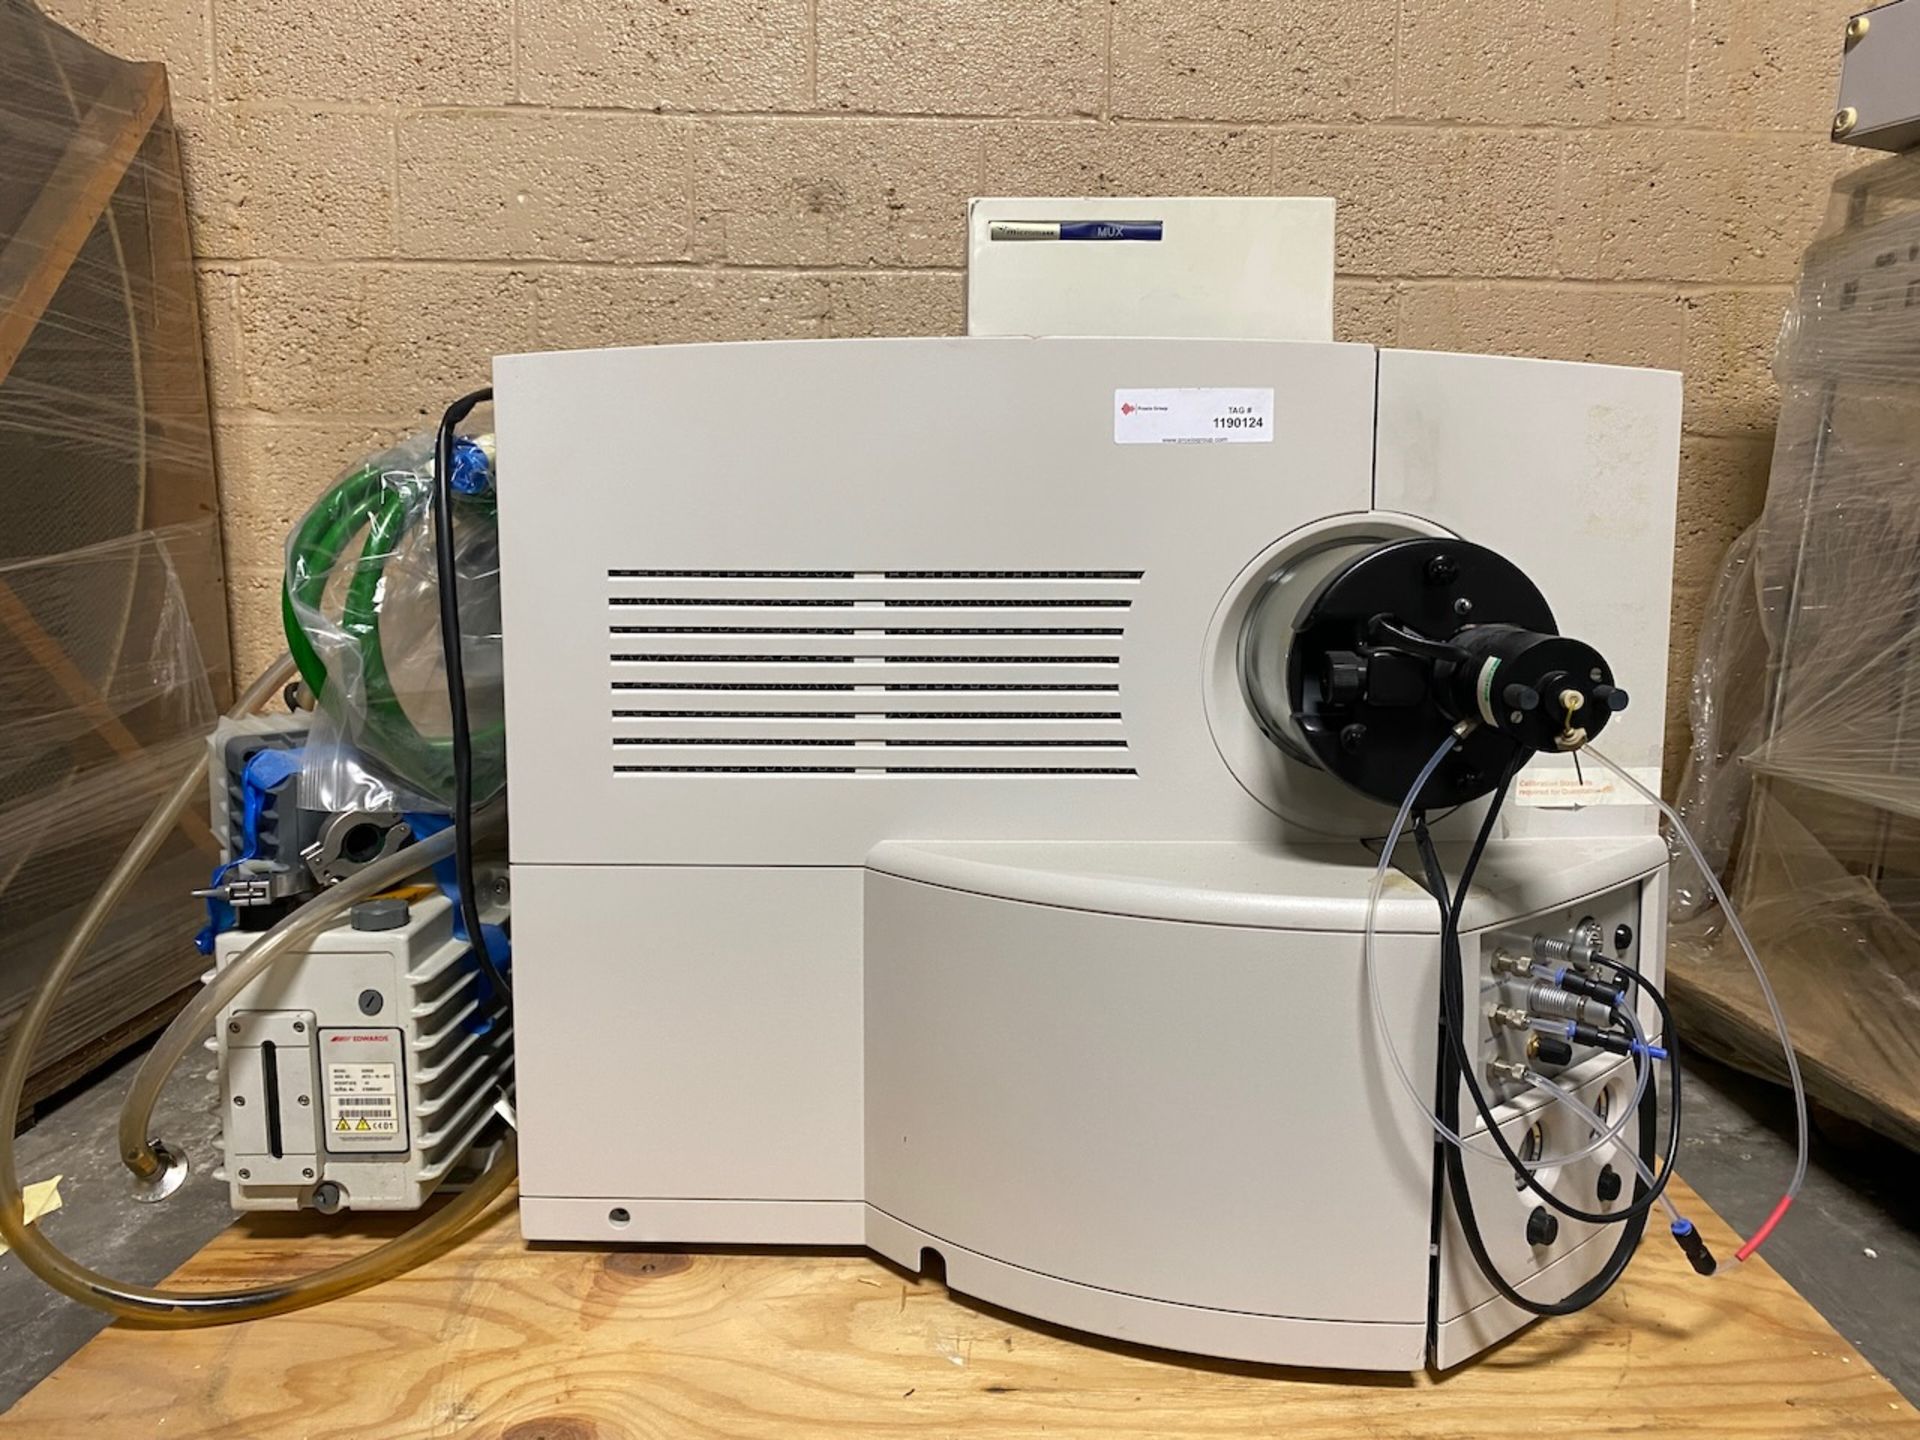 Micromass Q-tof Micro mass spectrometer with Micromass 3889 detector and Edwards E2M28 vacuum